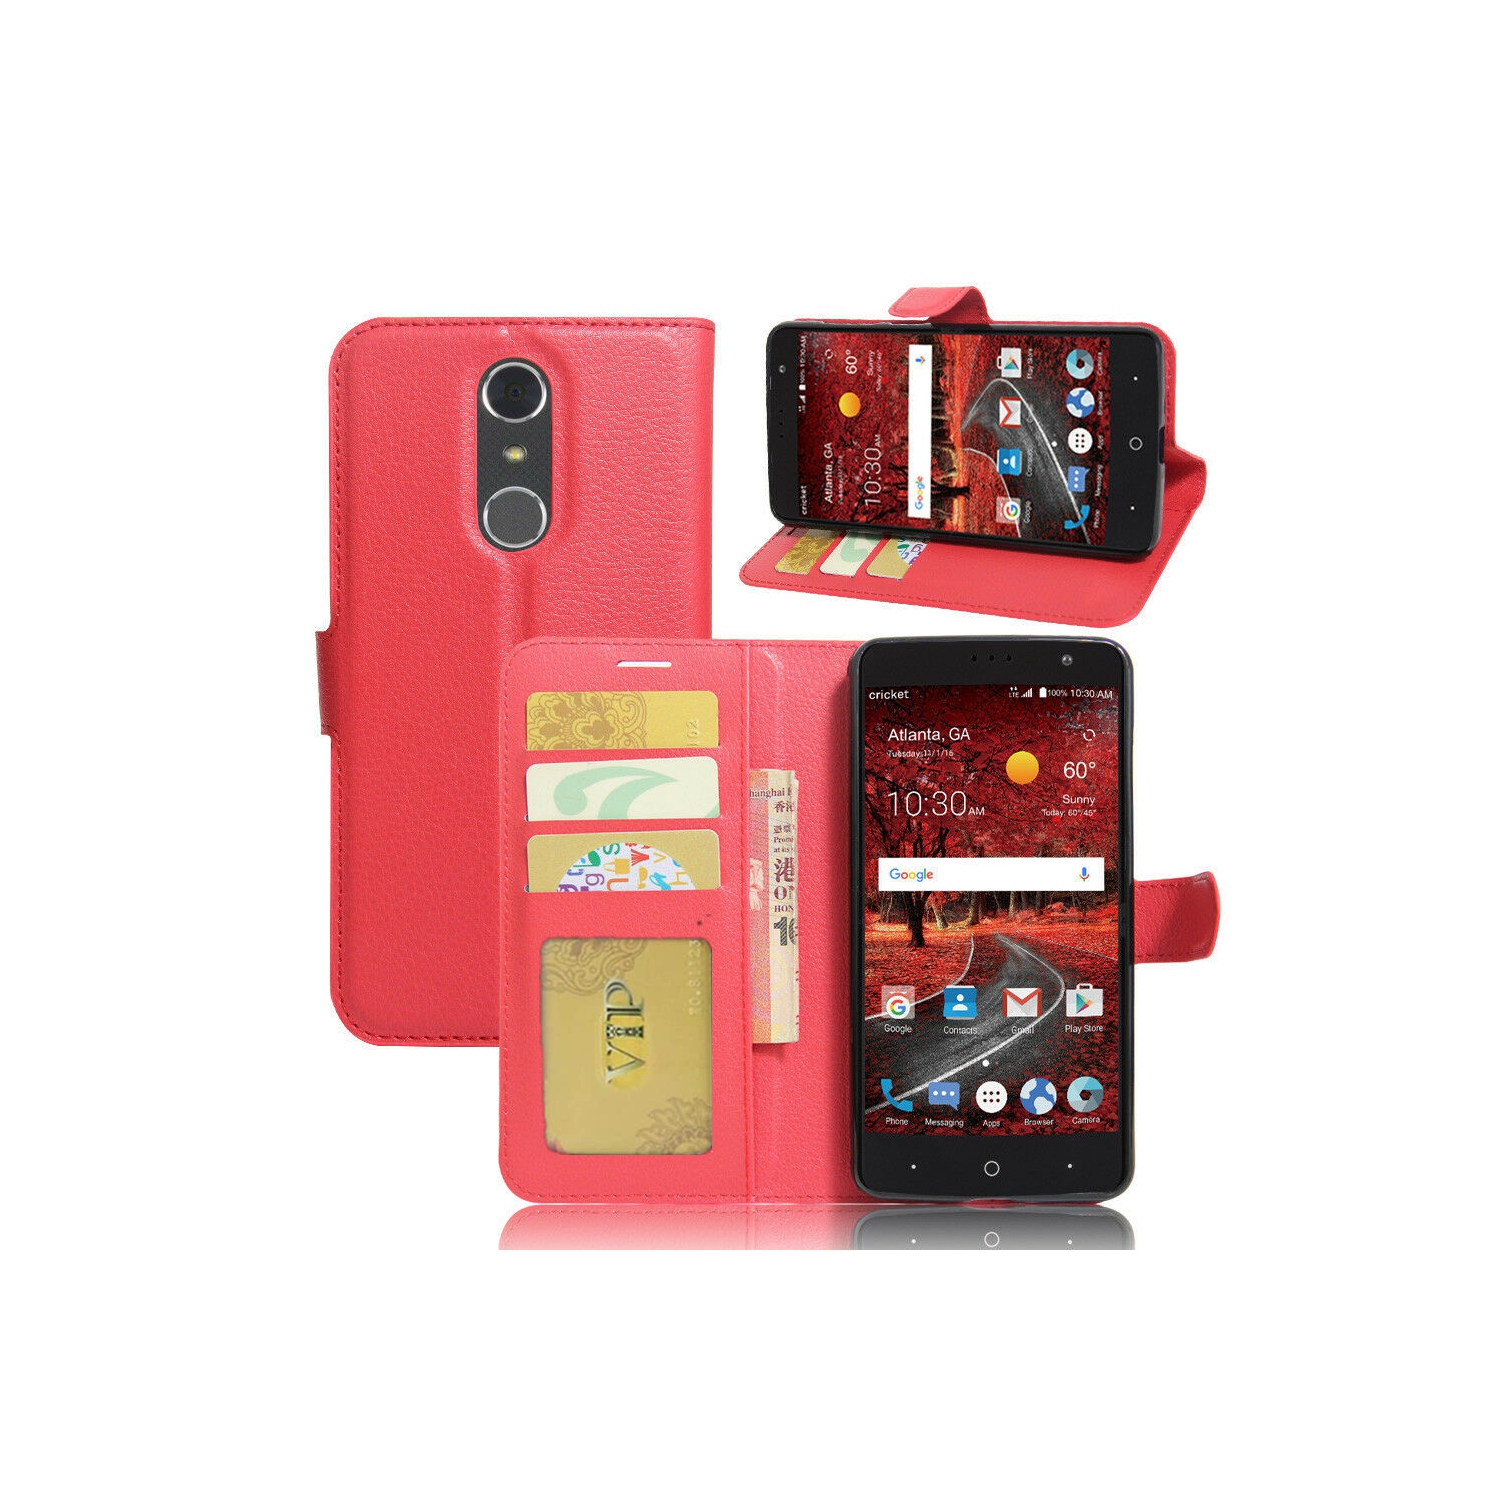 【CSmart】 Magnetic Card Slot Leather Folio Wallet Flip Case Cover for ZTE Grand X4, Red